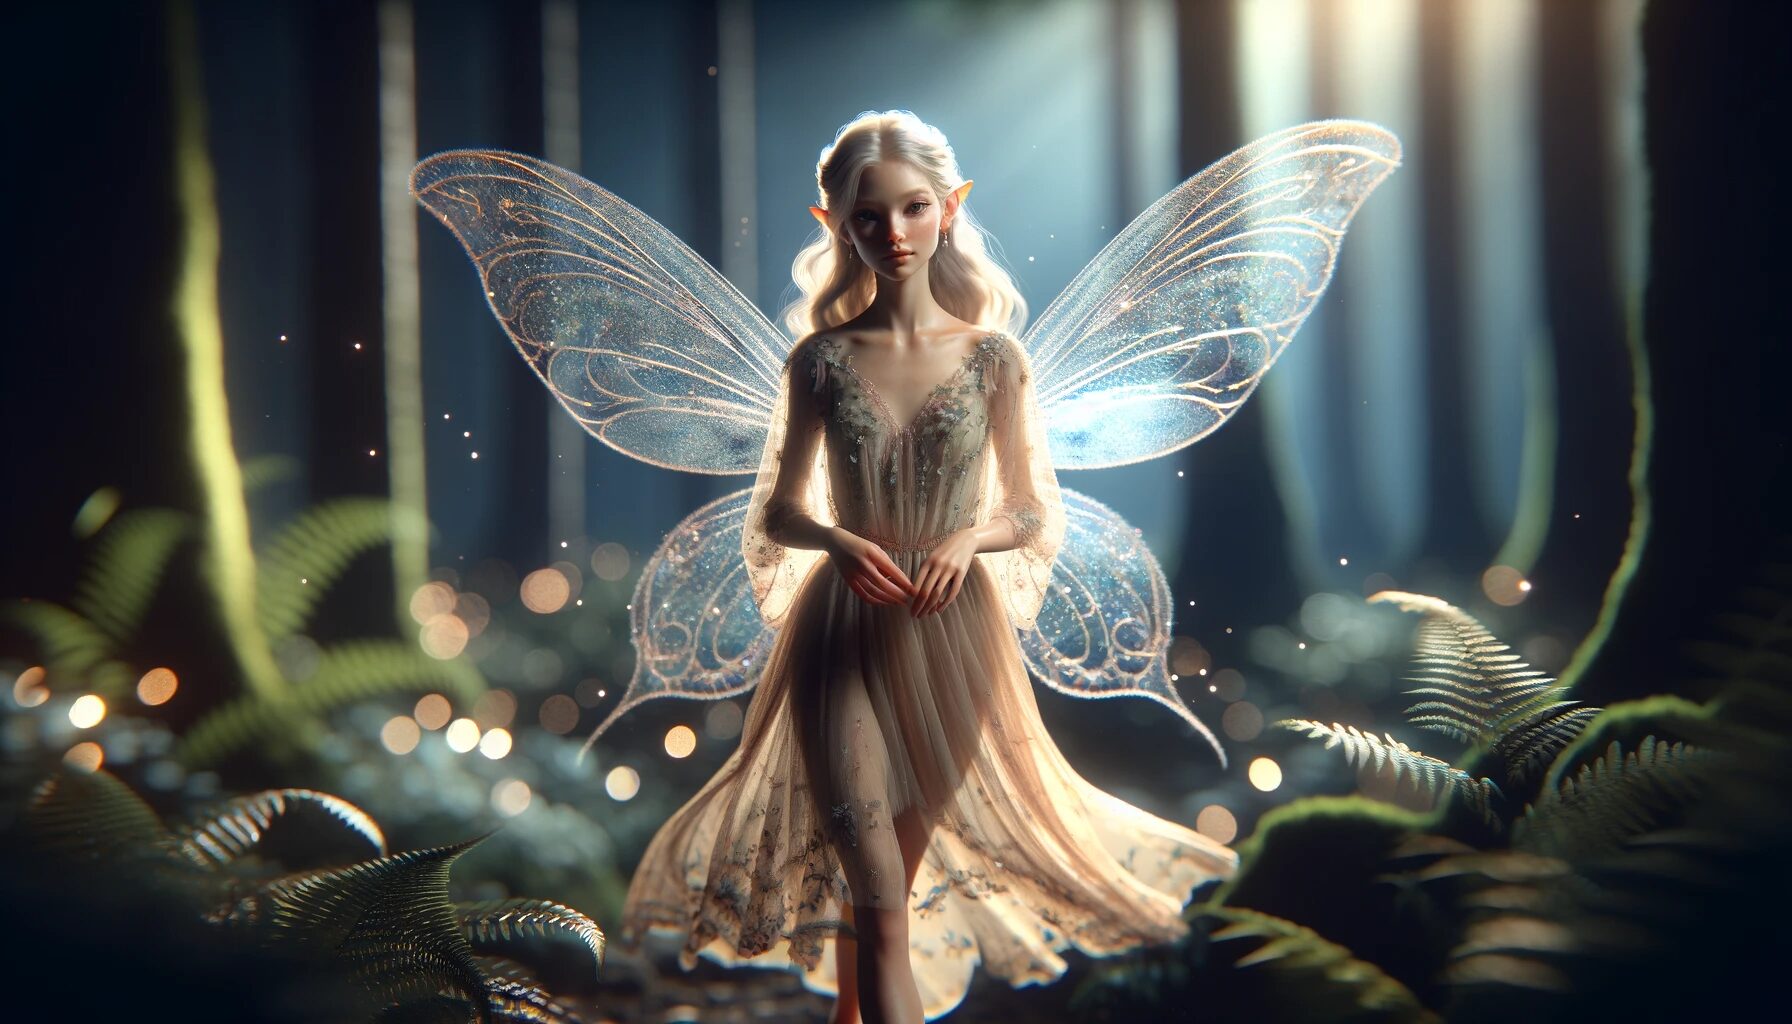 FAE - Supernatural Beings of Folklore | mythicalcreatures.info